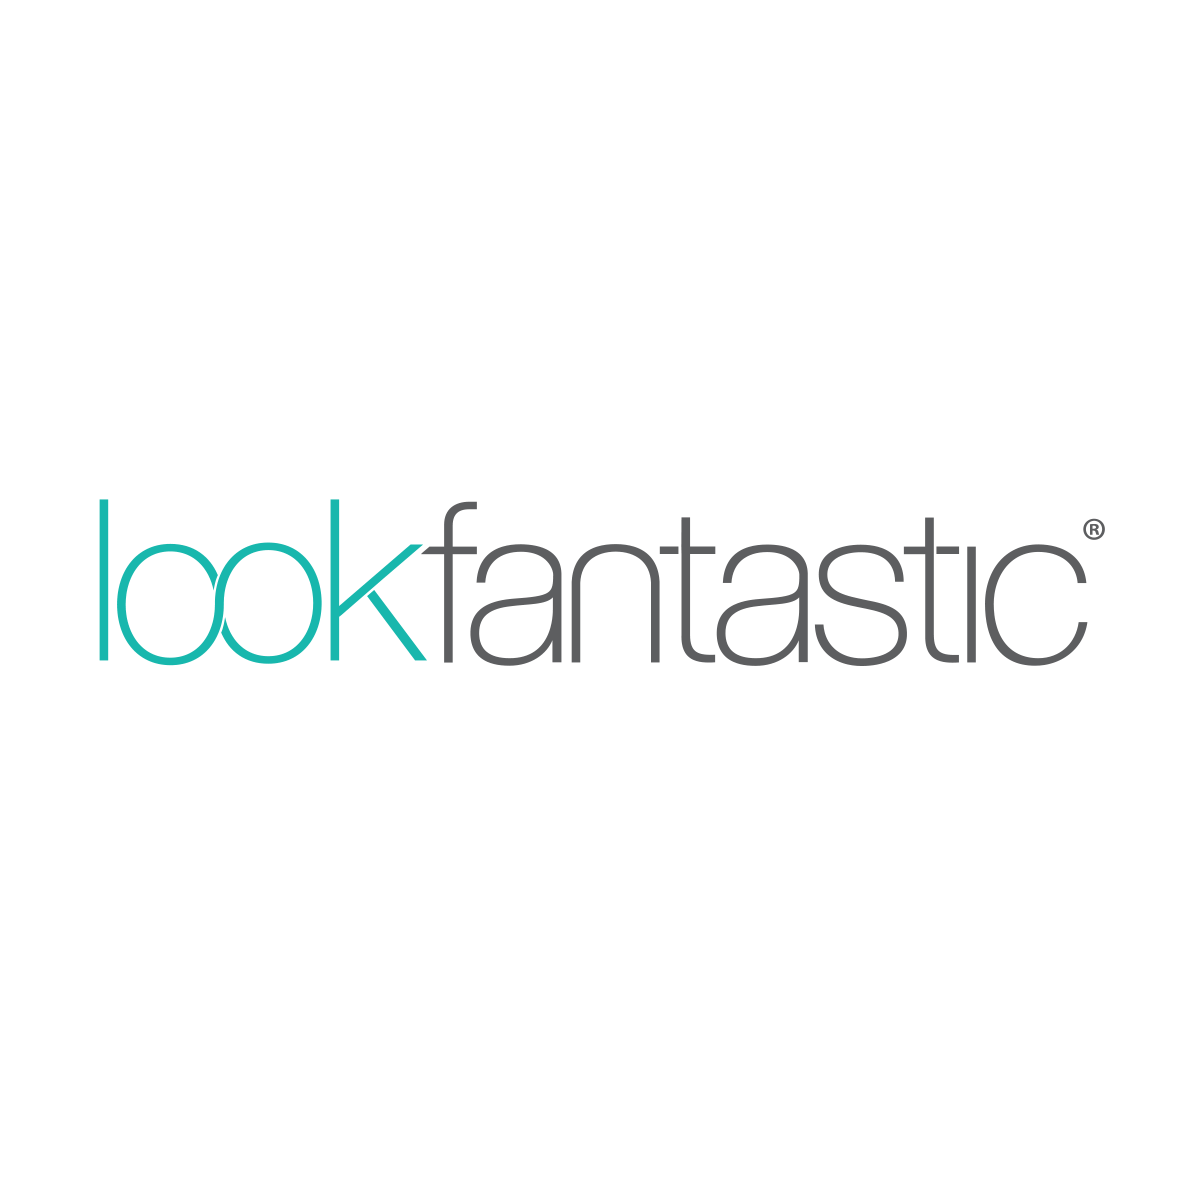 Look Fantastic coupon codes, promo codes and deals